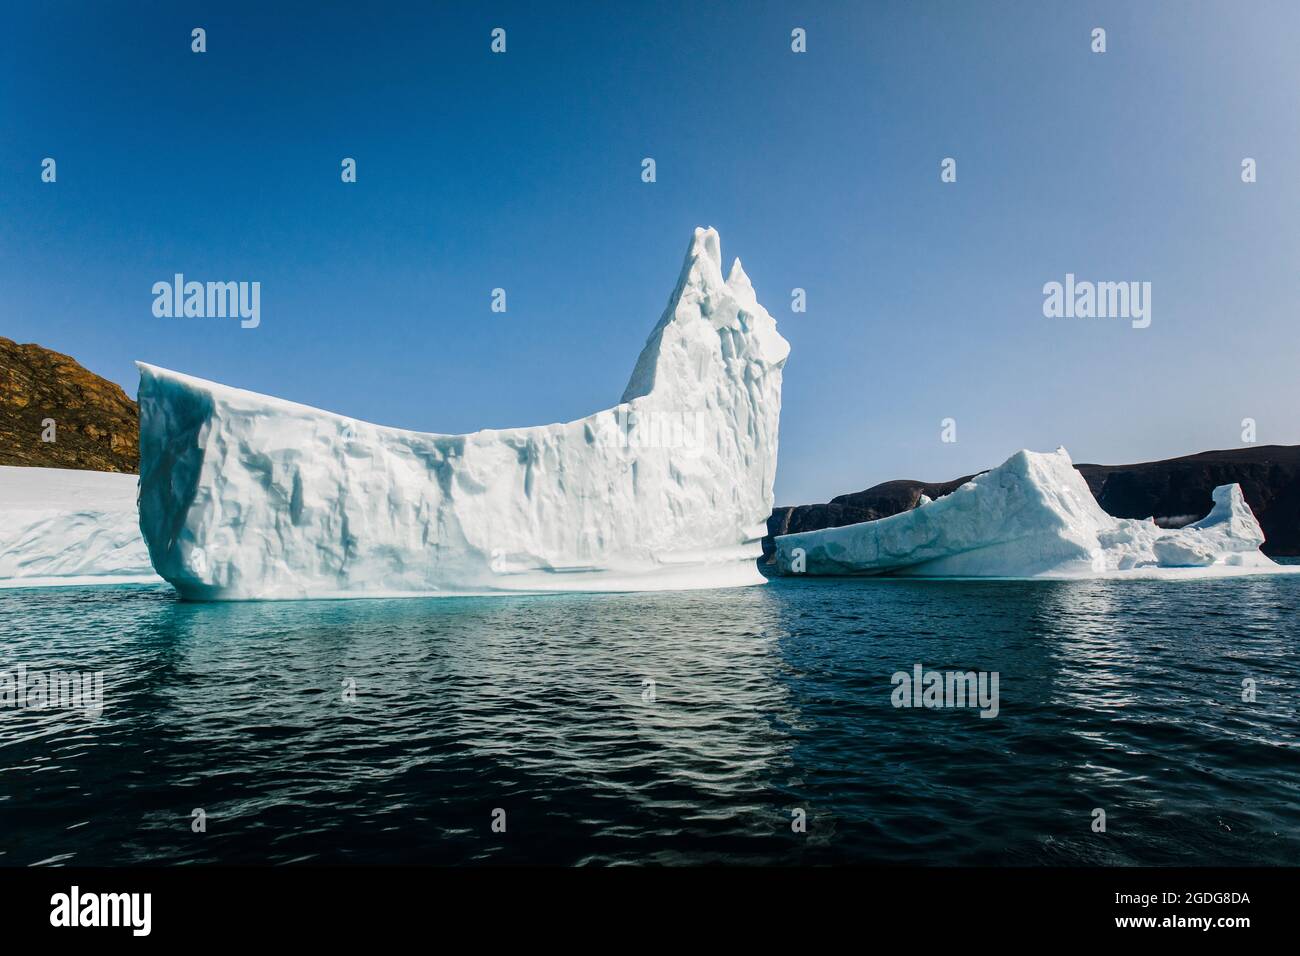 Iceberg floating in ocean in the shape of a ship Stock Photo